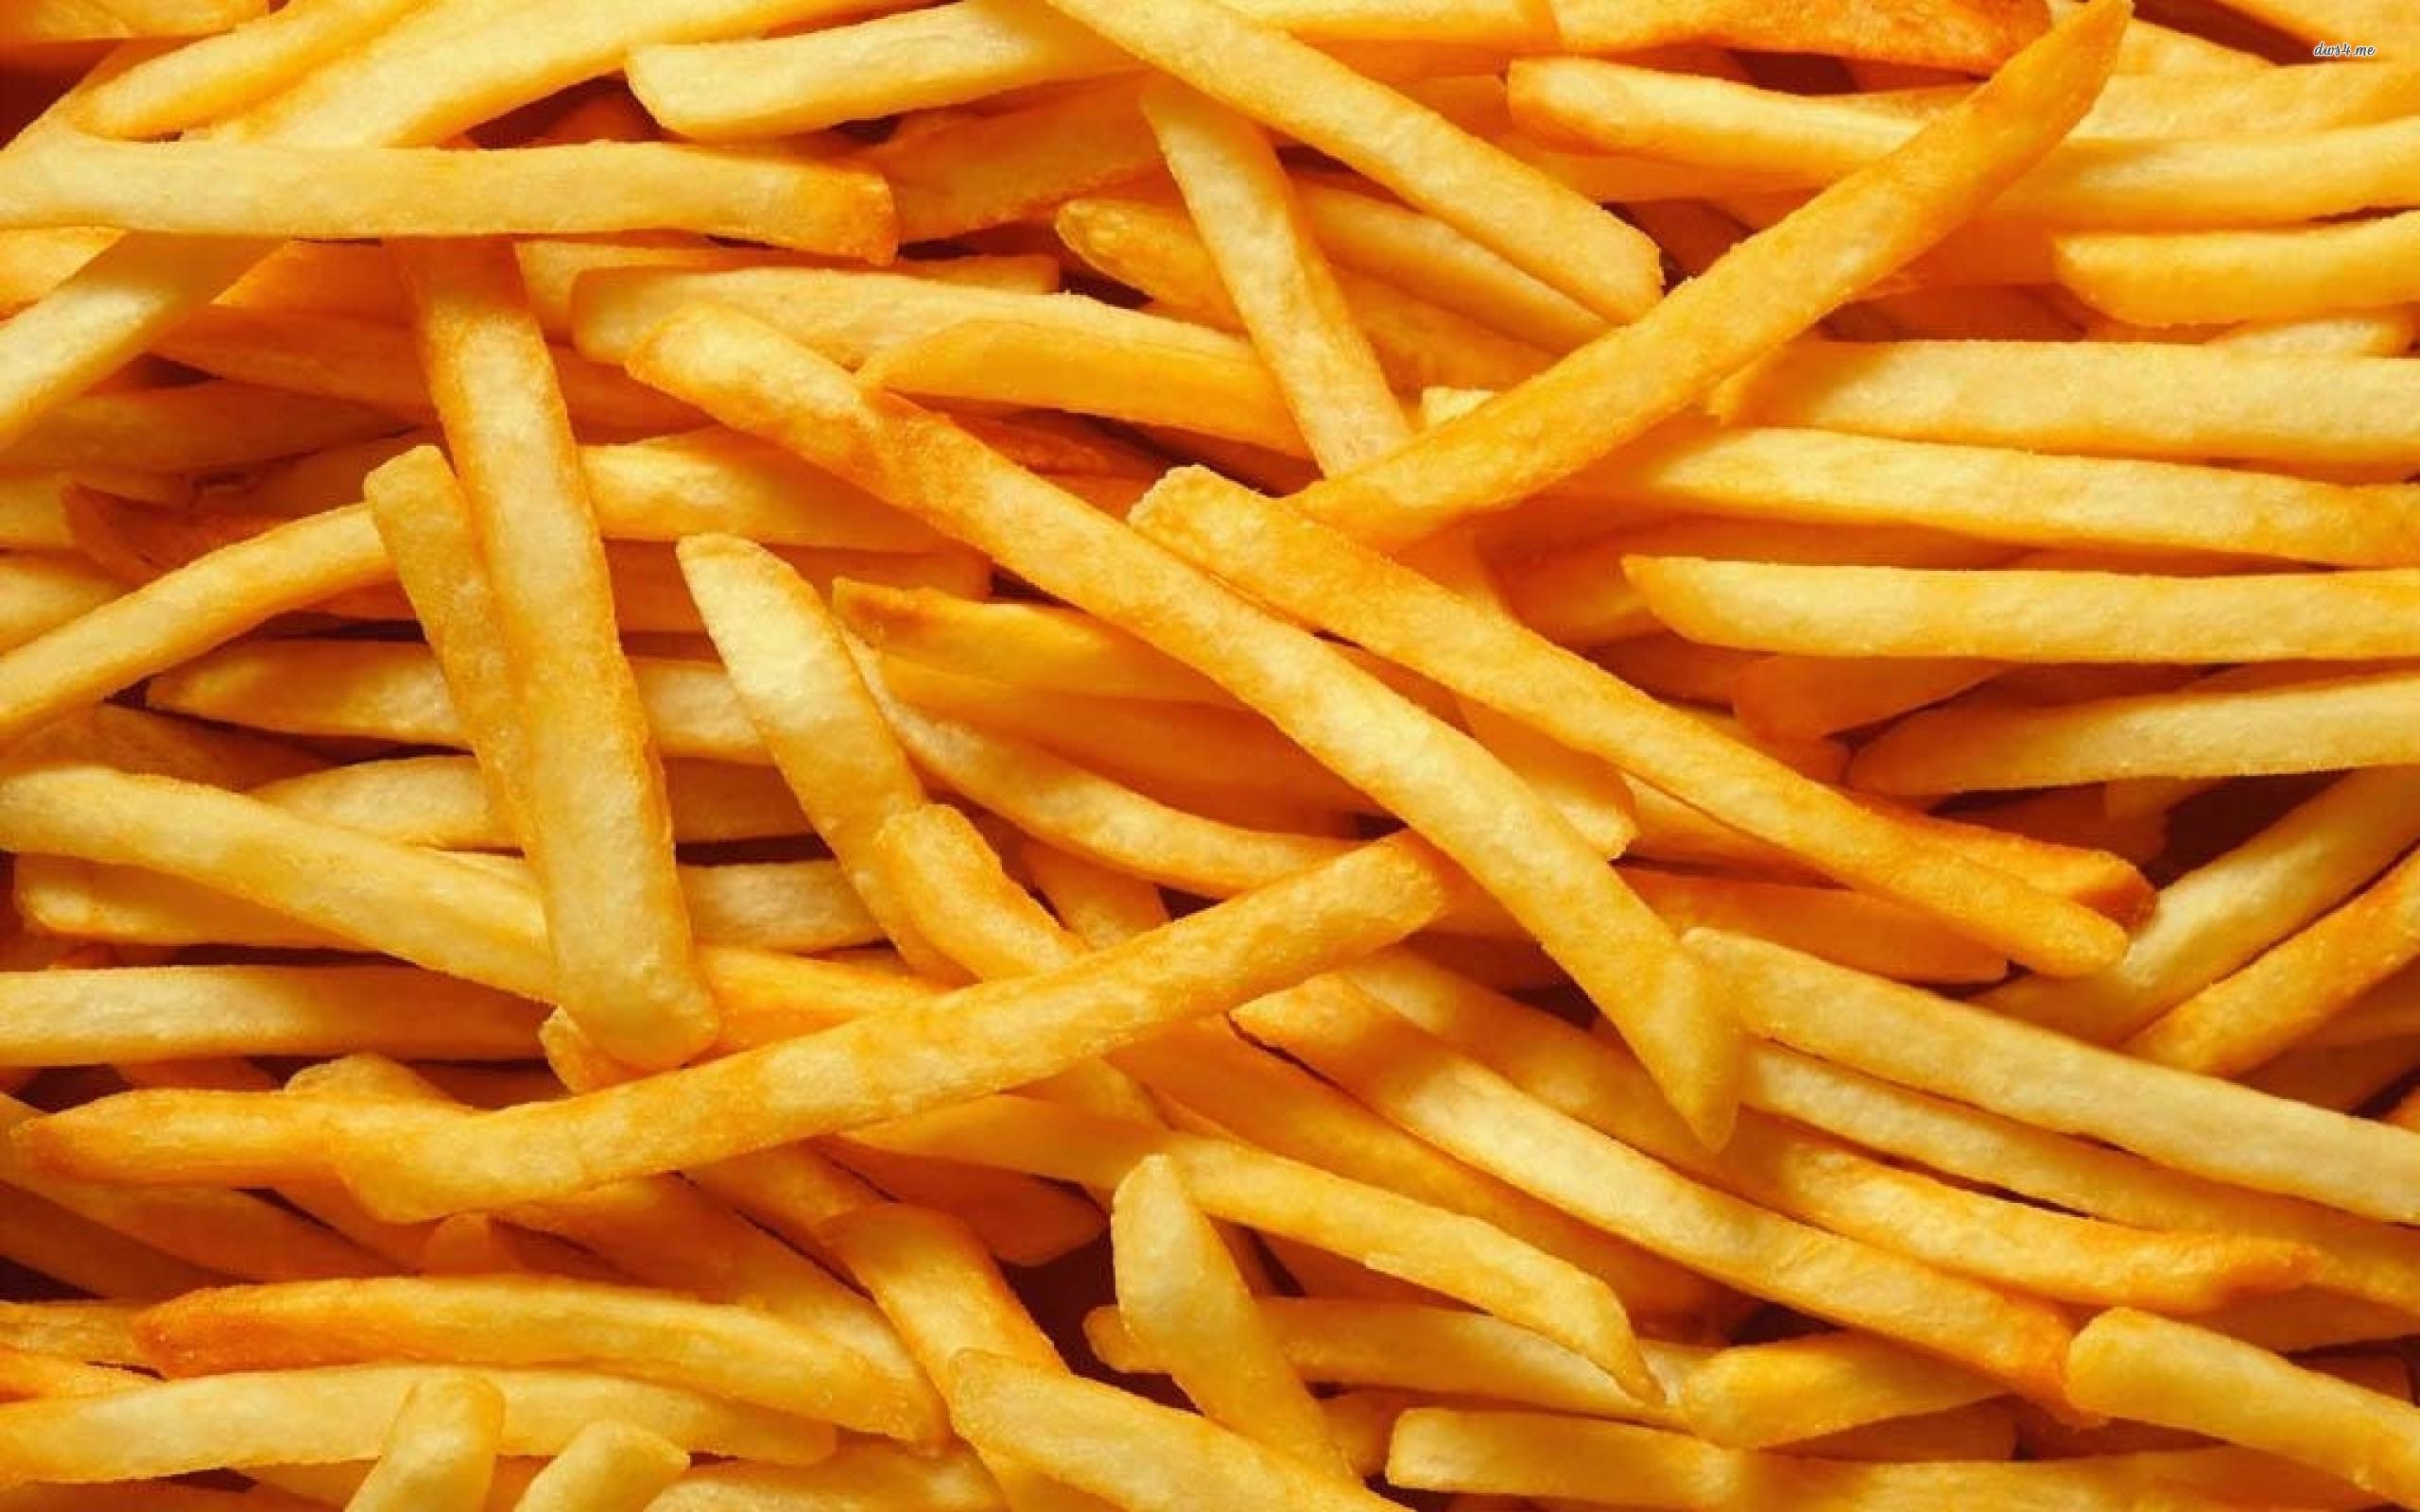 Research: French fries have health benefits | Agweek